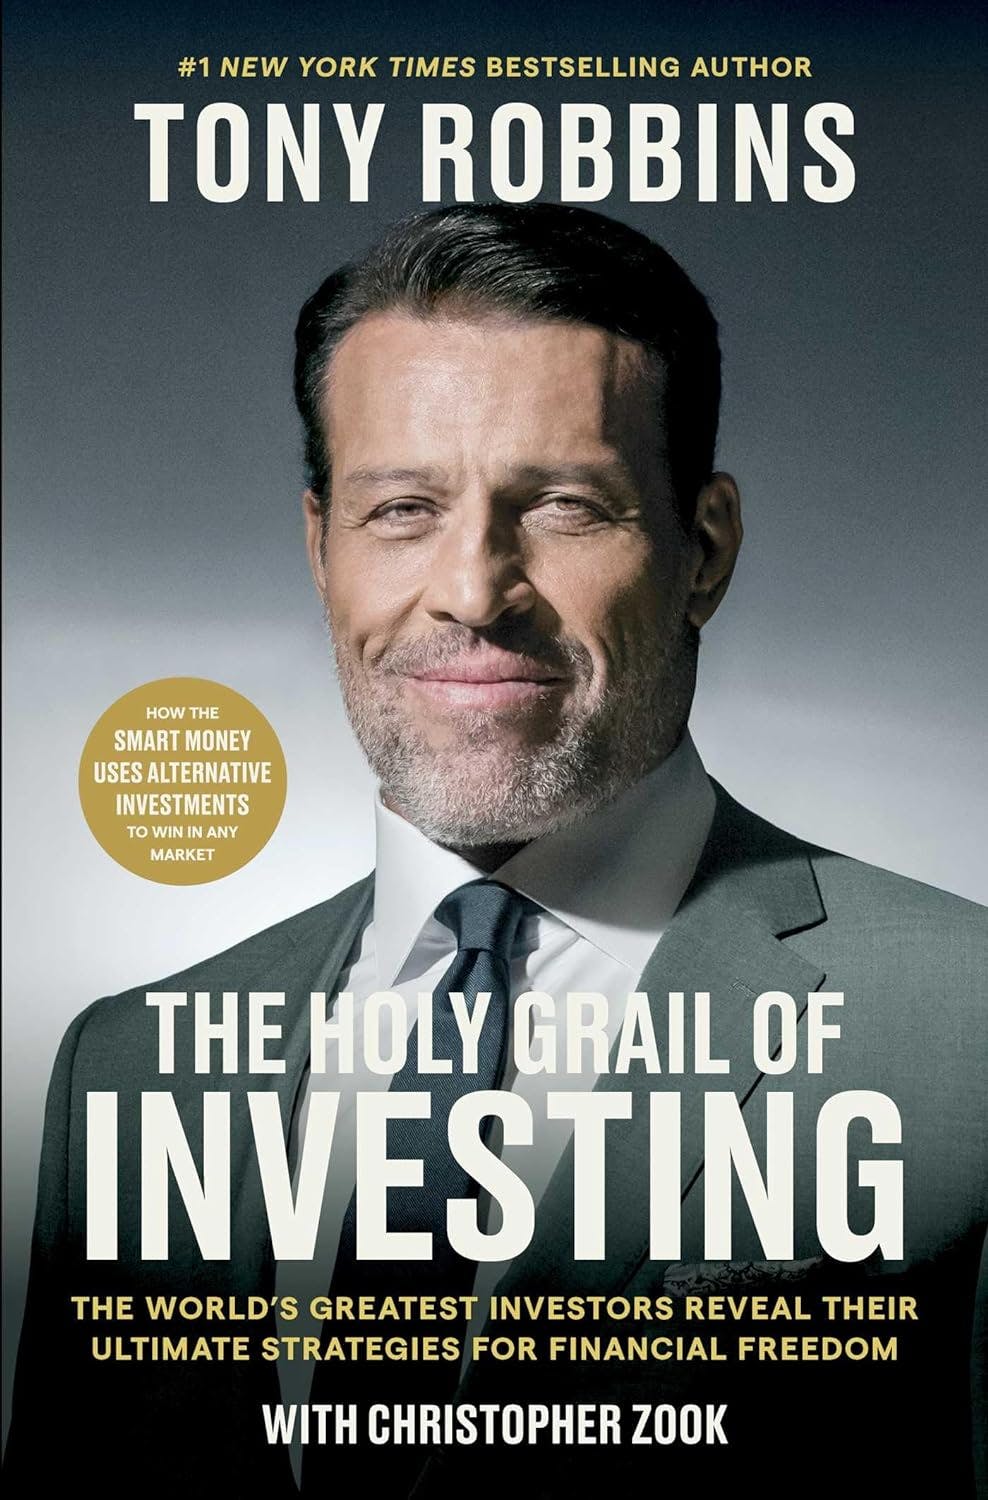 The Holy Grail of Investing by Tony Robbins